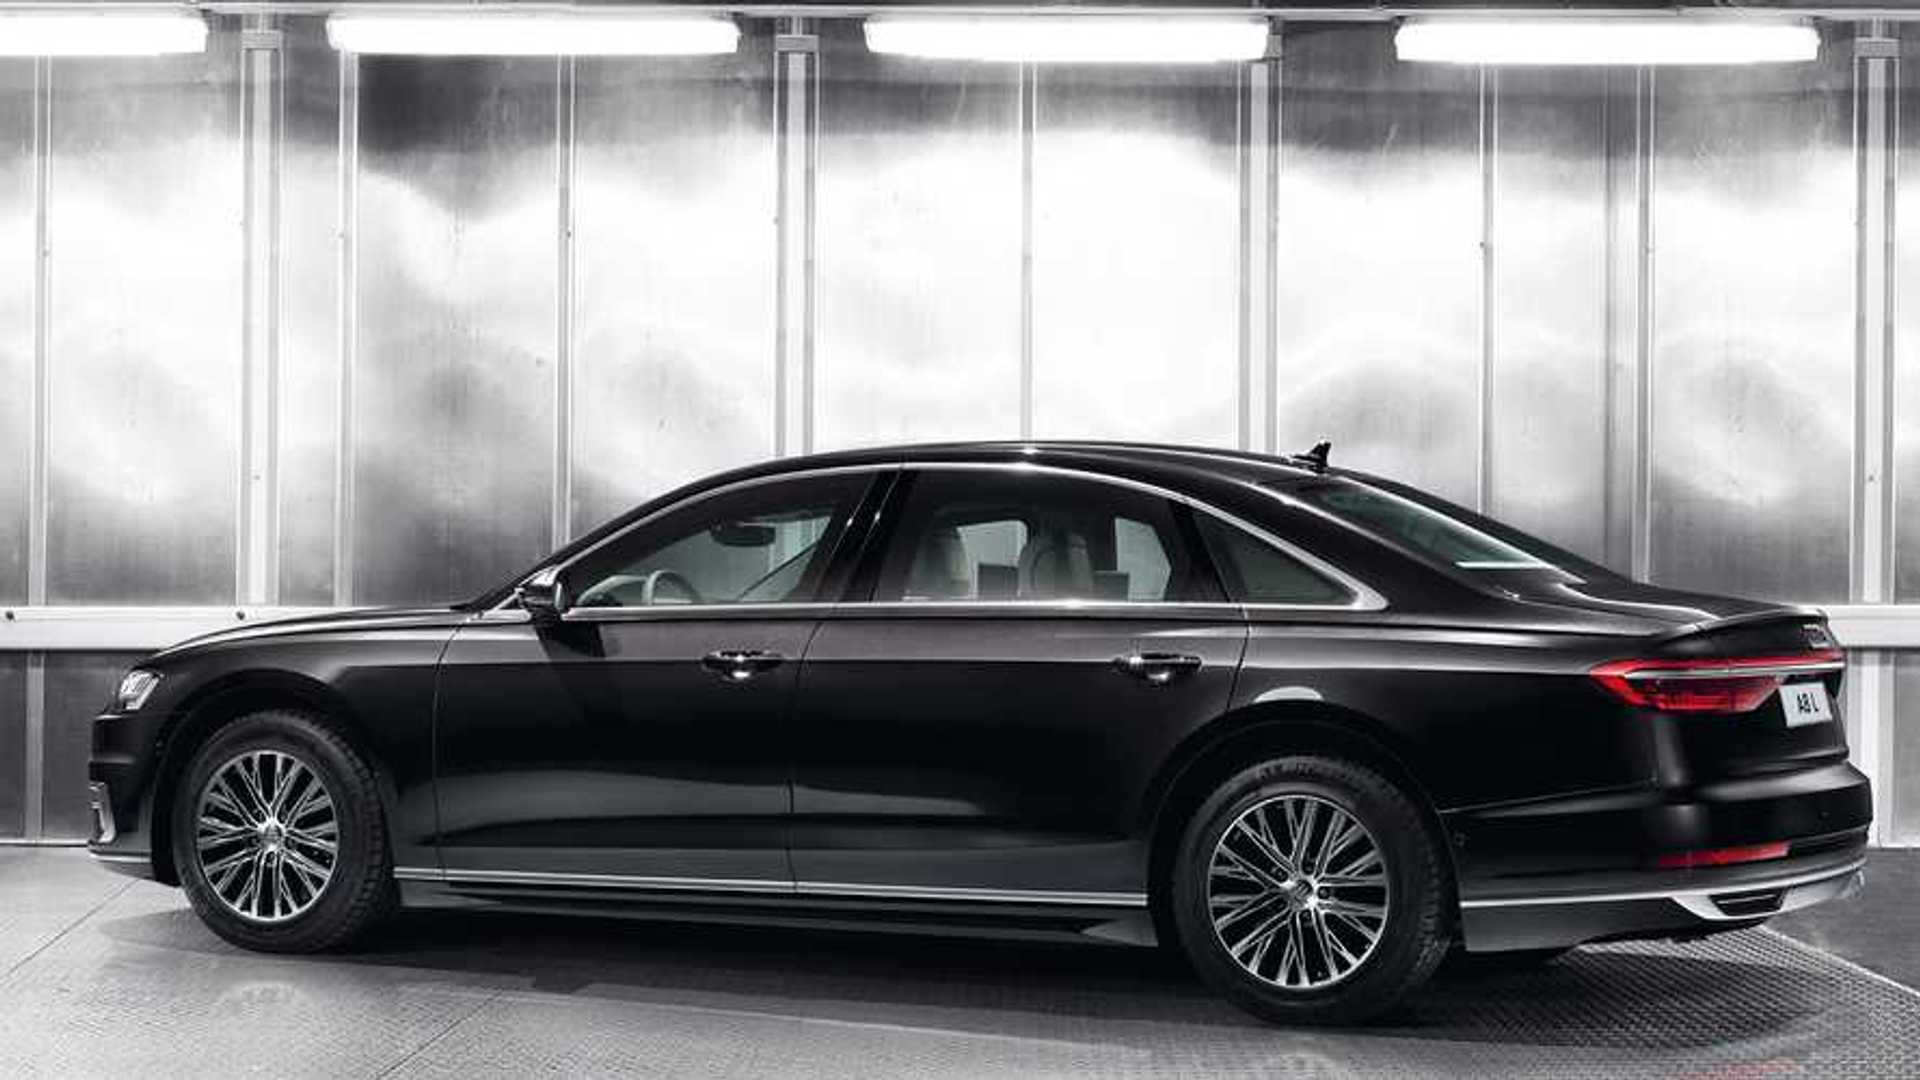 Audi A8 L Security Is An Armored Luxobarge With The S8's Engine